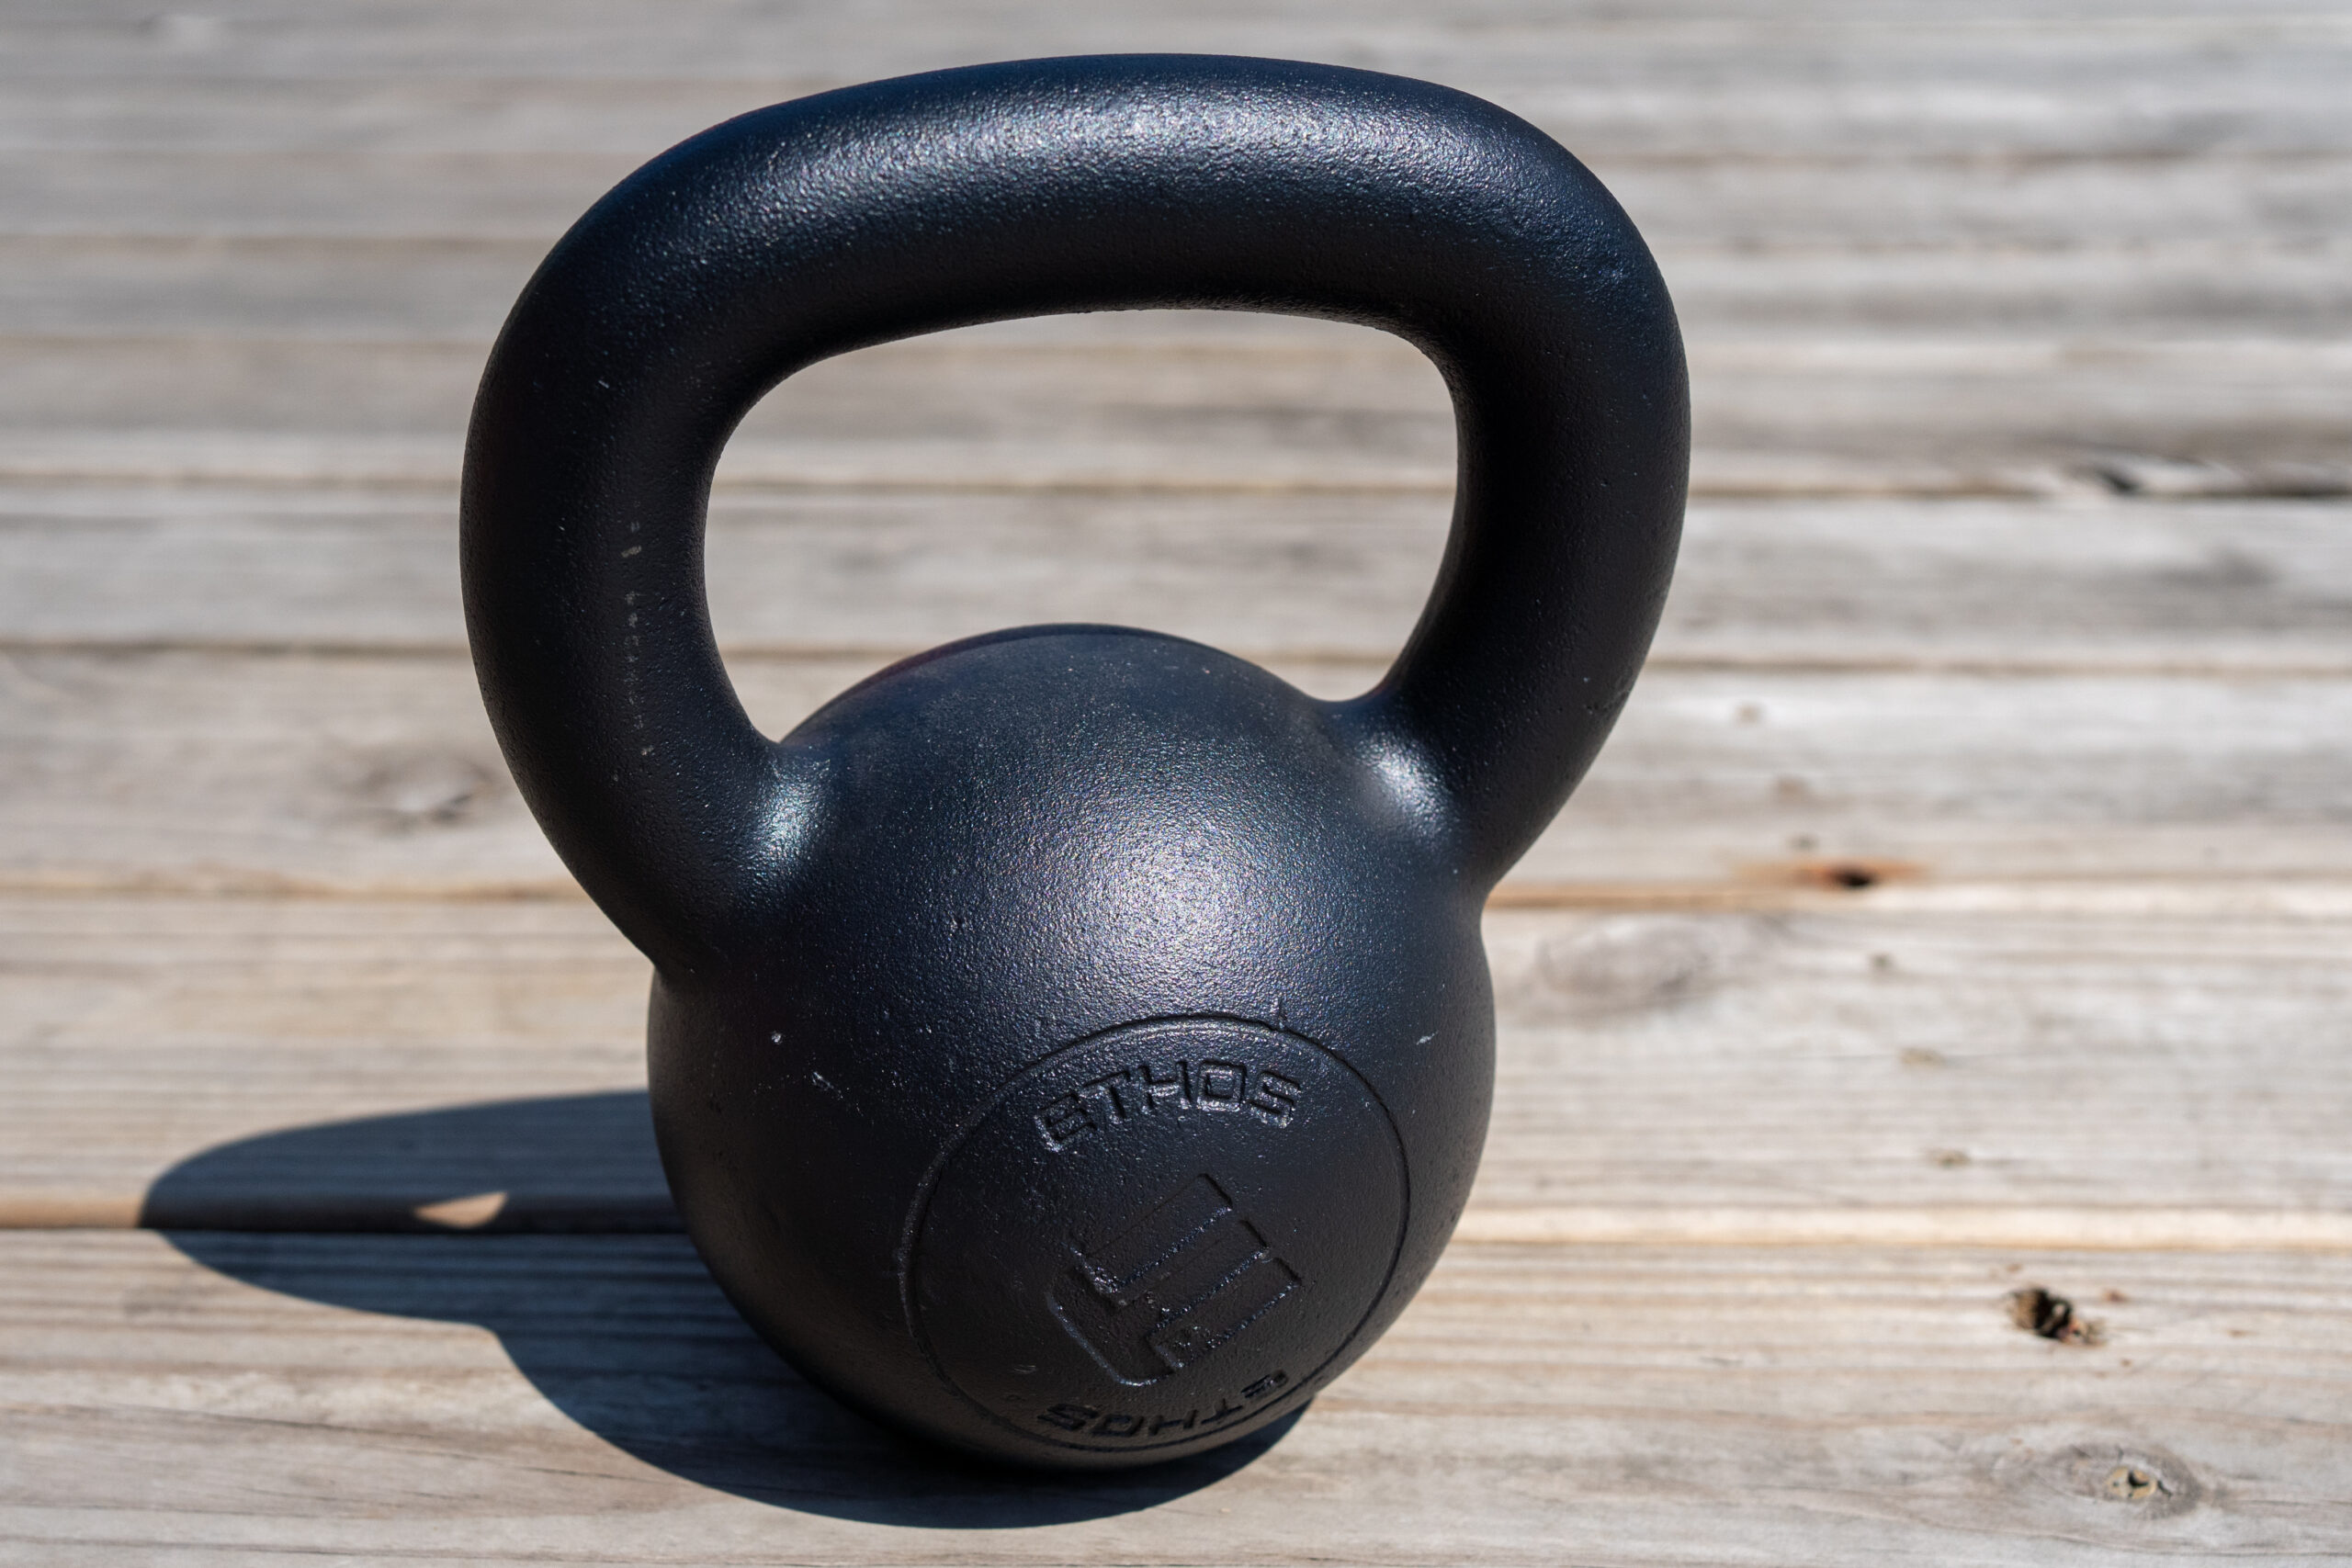 a kettlebell sits on wood planks